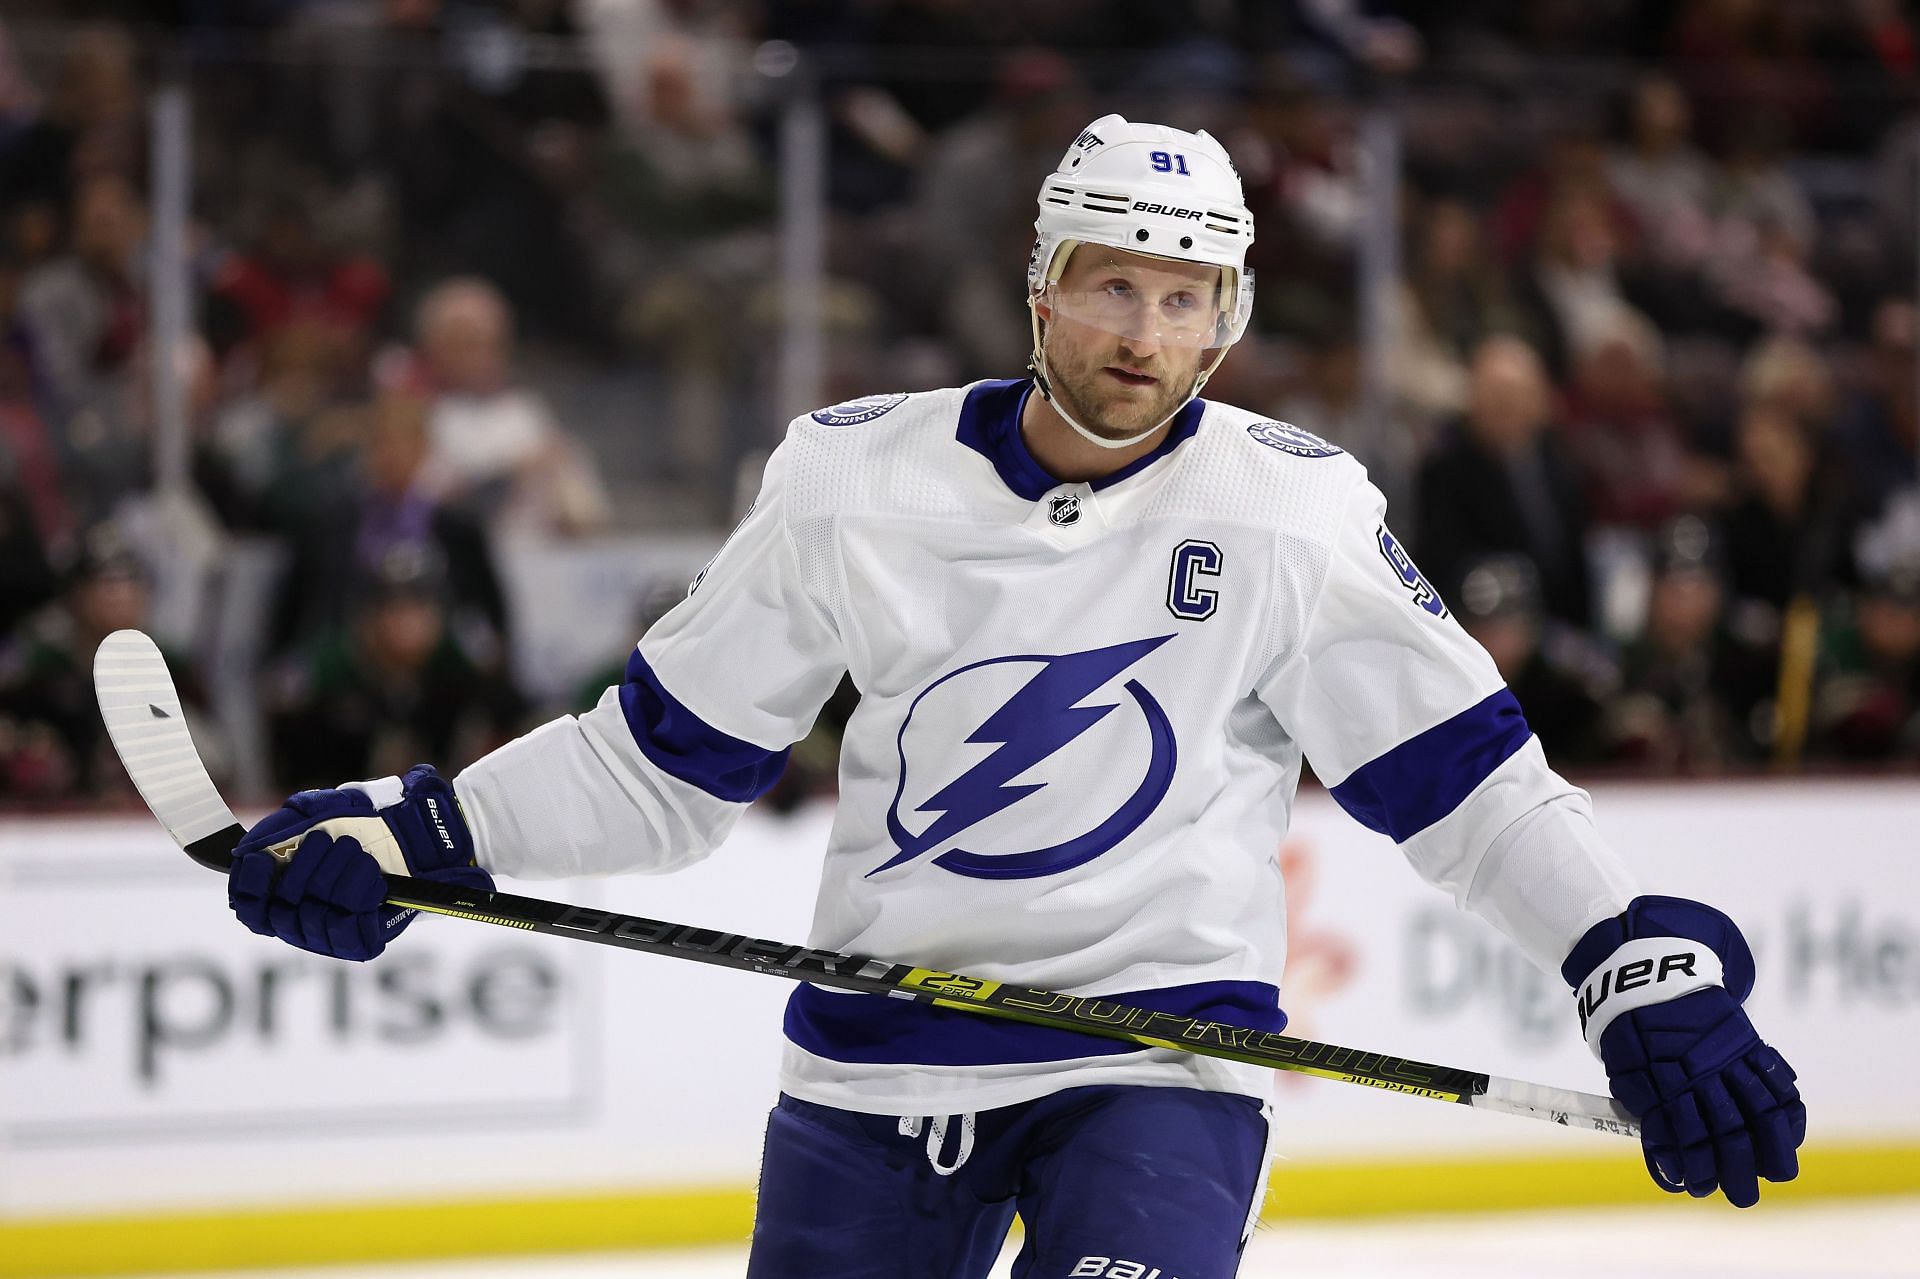 After a festive NHL All-Star game it's back to business, and Tampa Bay and Steven  Stamkos have lots to talk about - Los Angeles Times